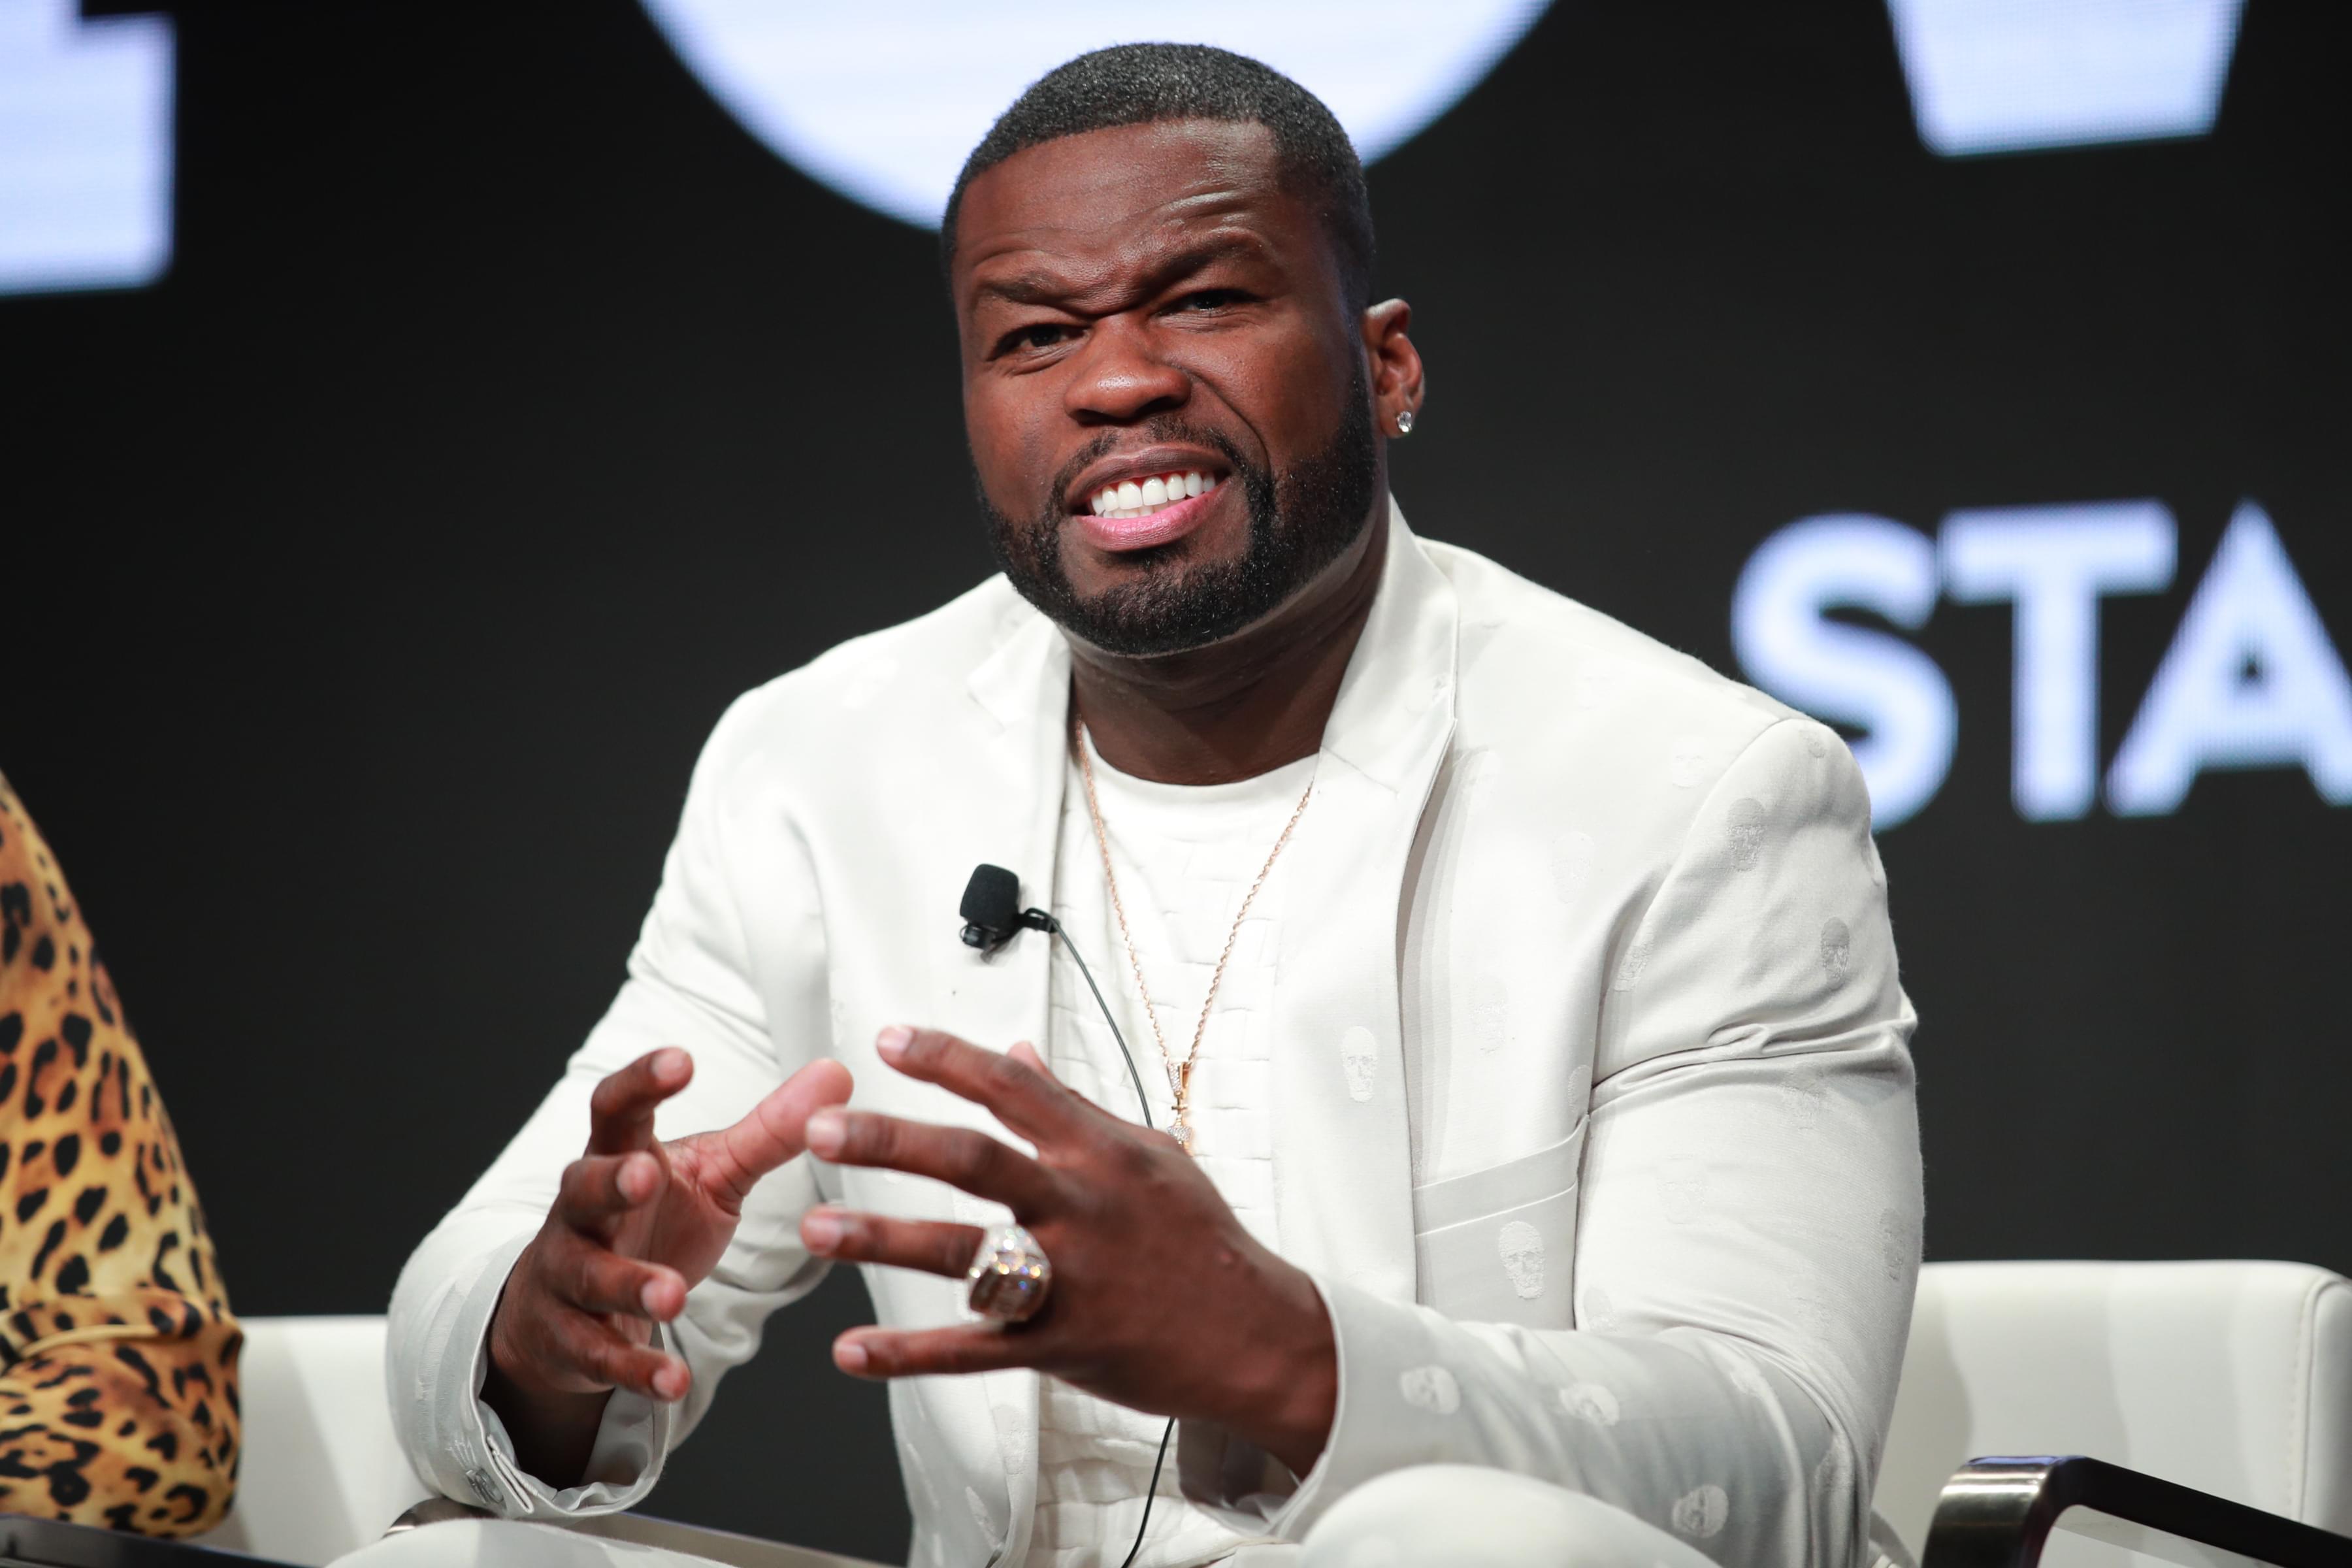 50 Cent's ‘Black Mafia Family’ Drama Series Has Been Greenlighted By Starz